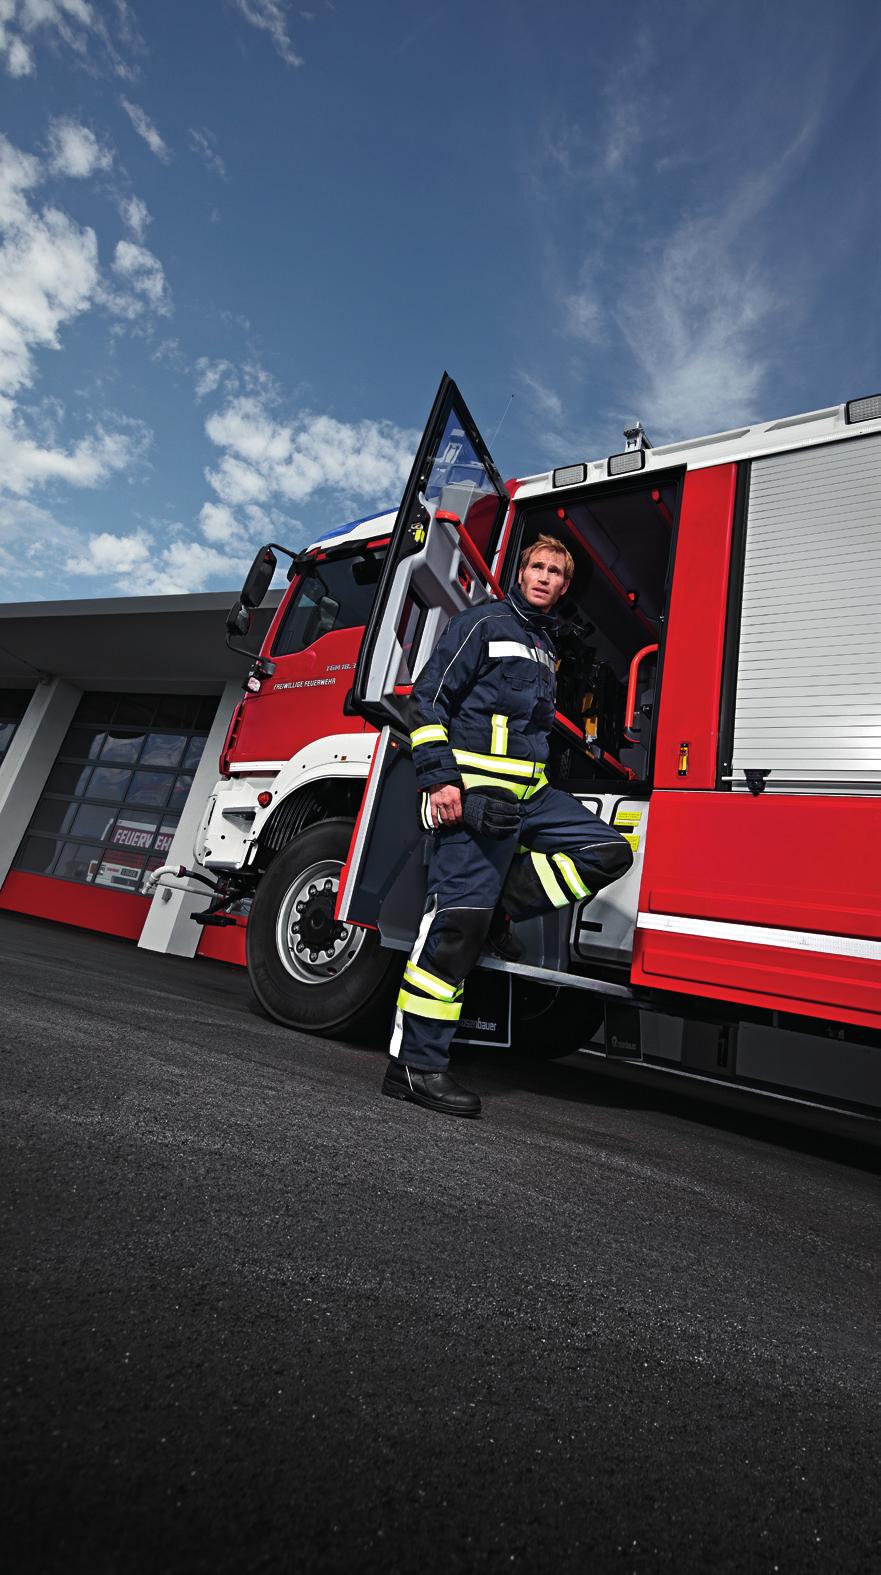 FIRE MAX 3 Next generation protection and wearing comfort.